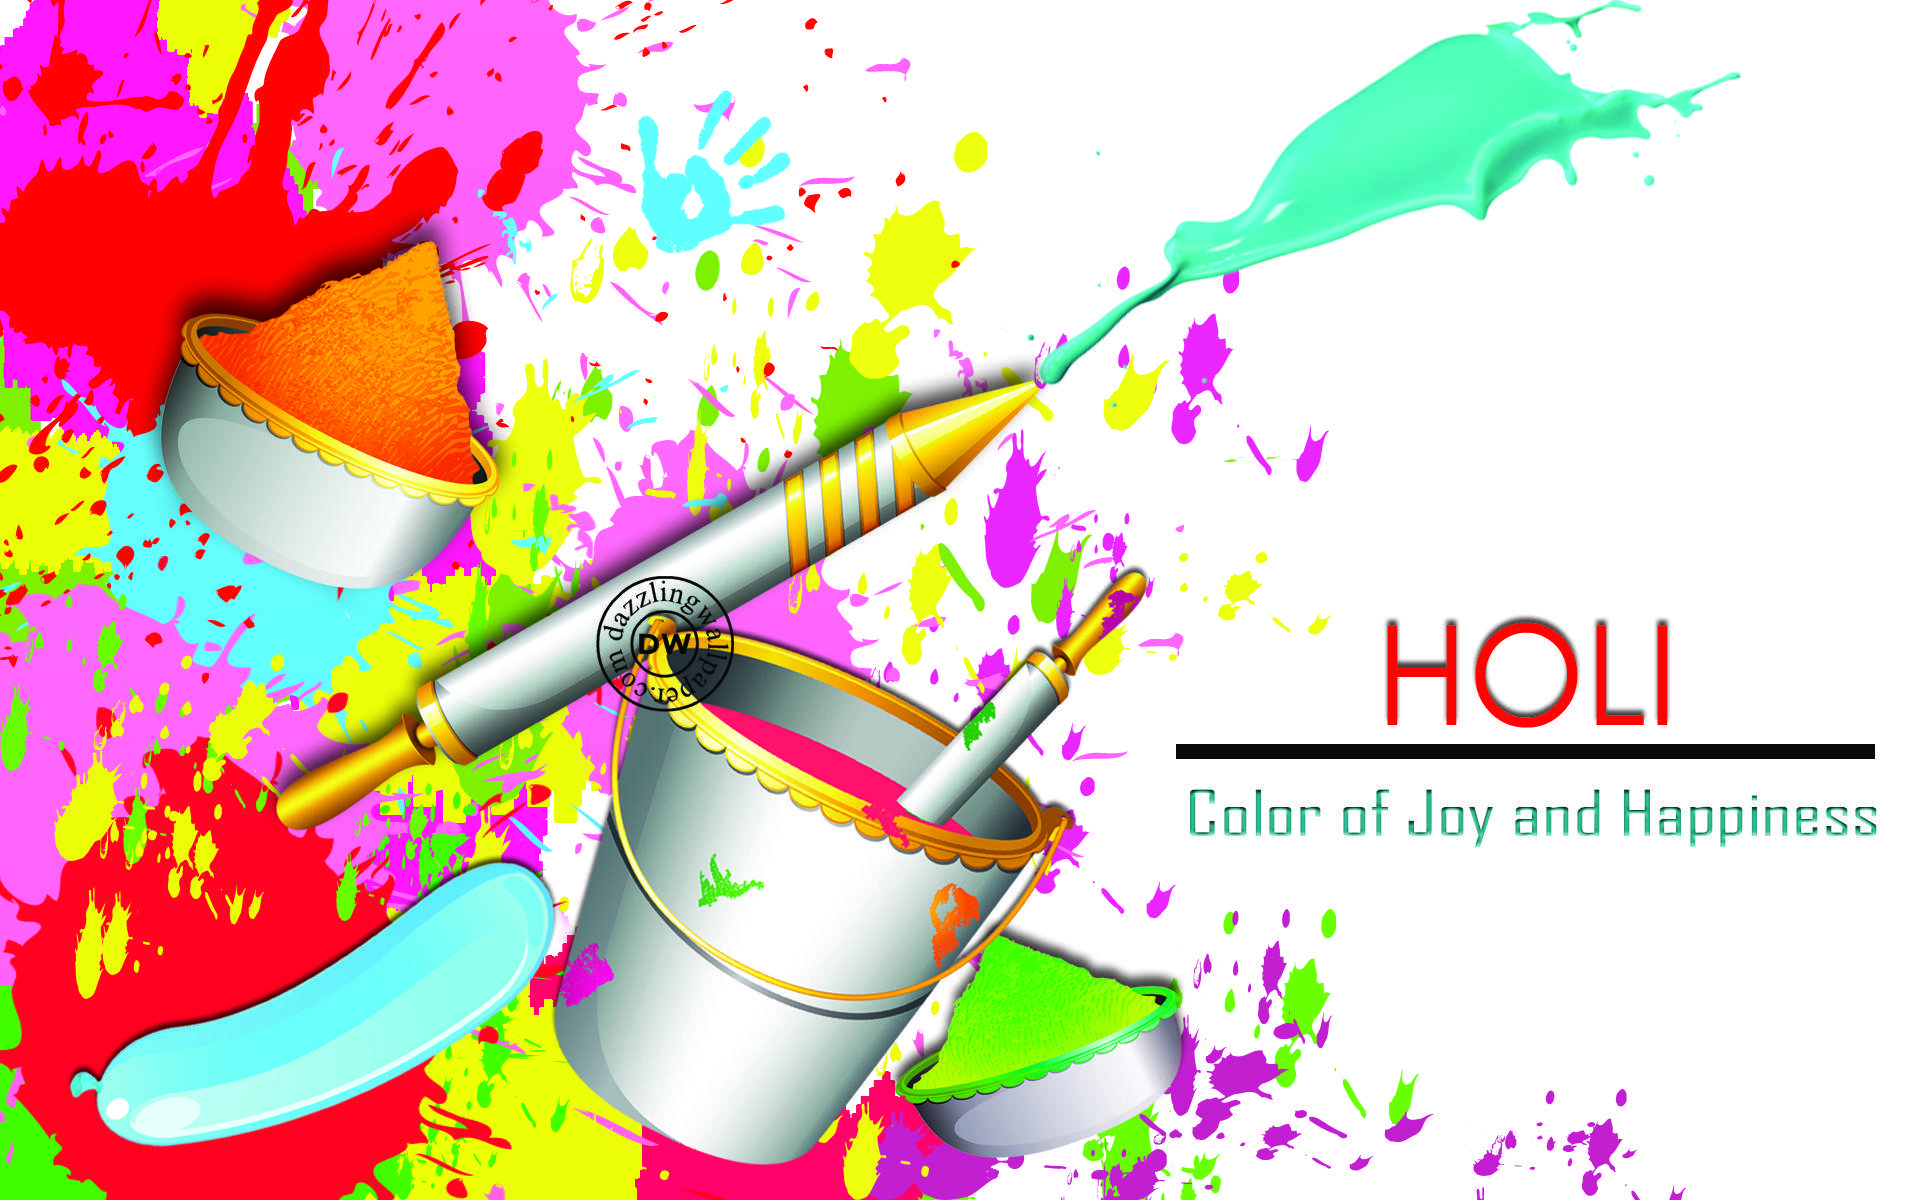 Cute Happy Holi 2018 Image and Wallpaper